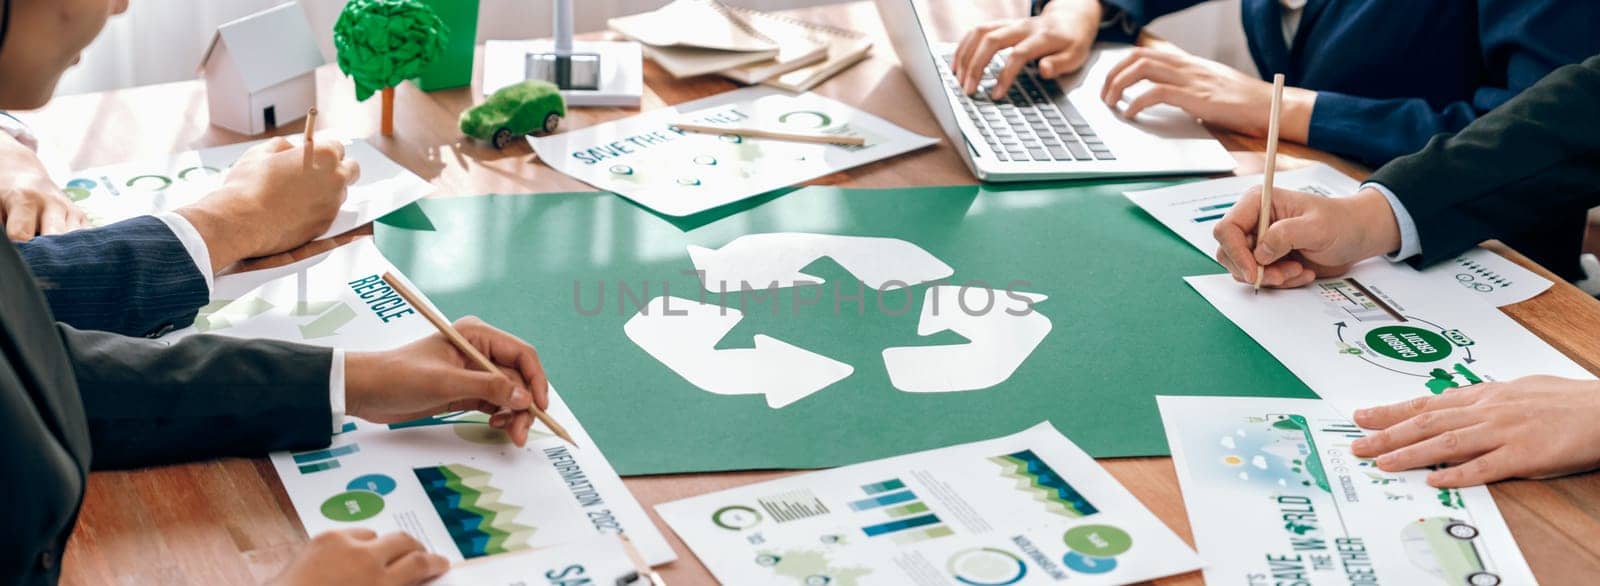 Group of business people planning and discussing on recycle reduce reuse policy symbol in office meeting room. Green business company with eco-friendly waste management regulation concept.Trailblazing